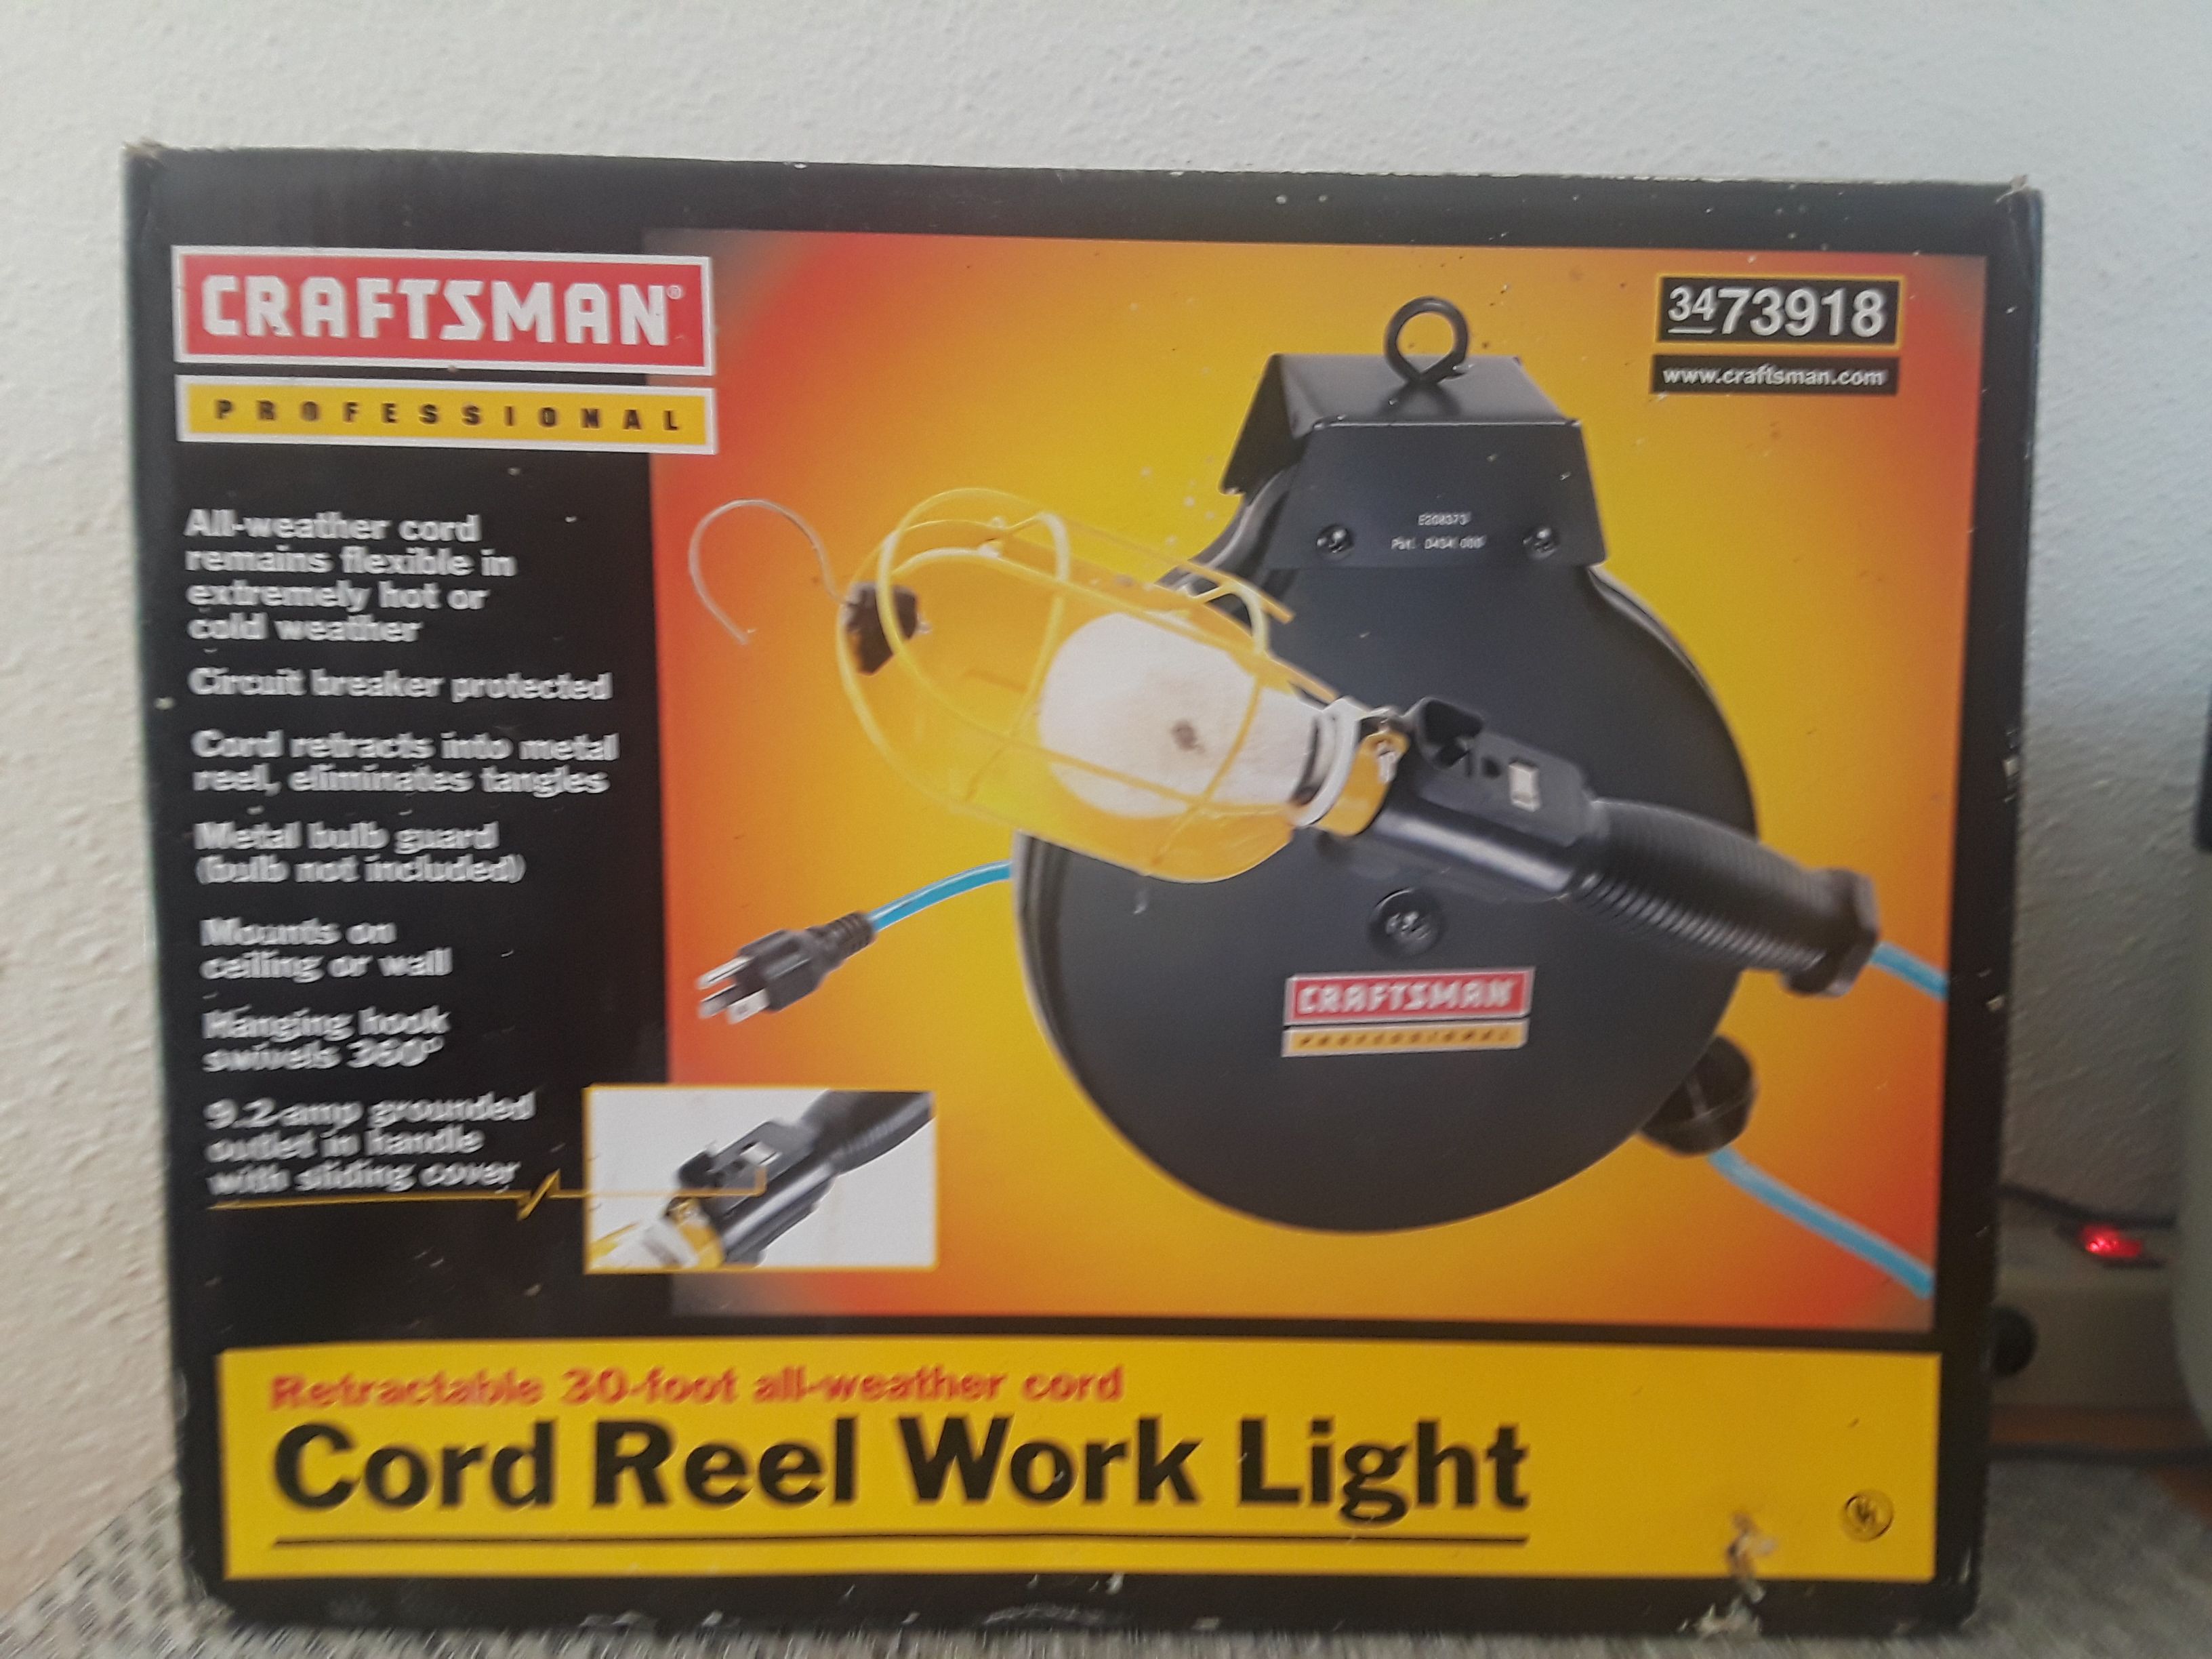 Craftsman cord reel work light. Still in the box for Sale in